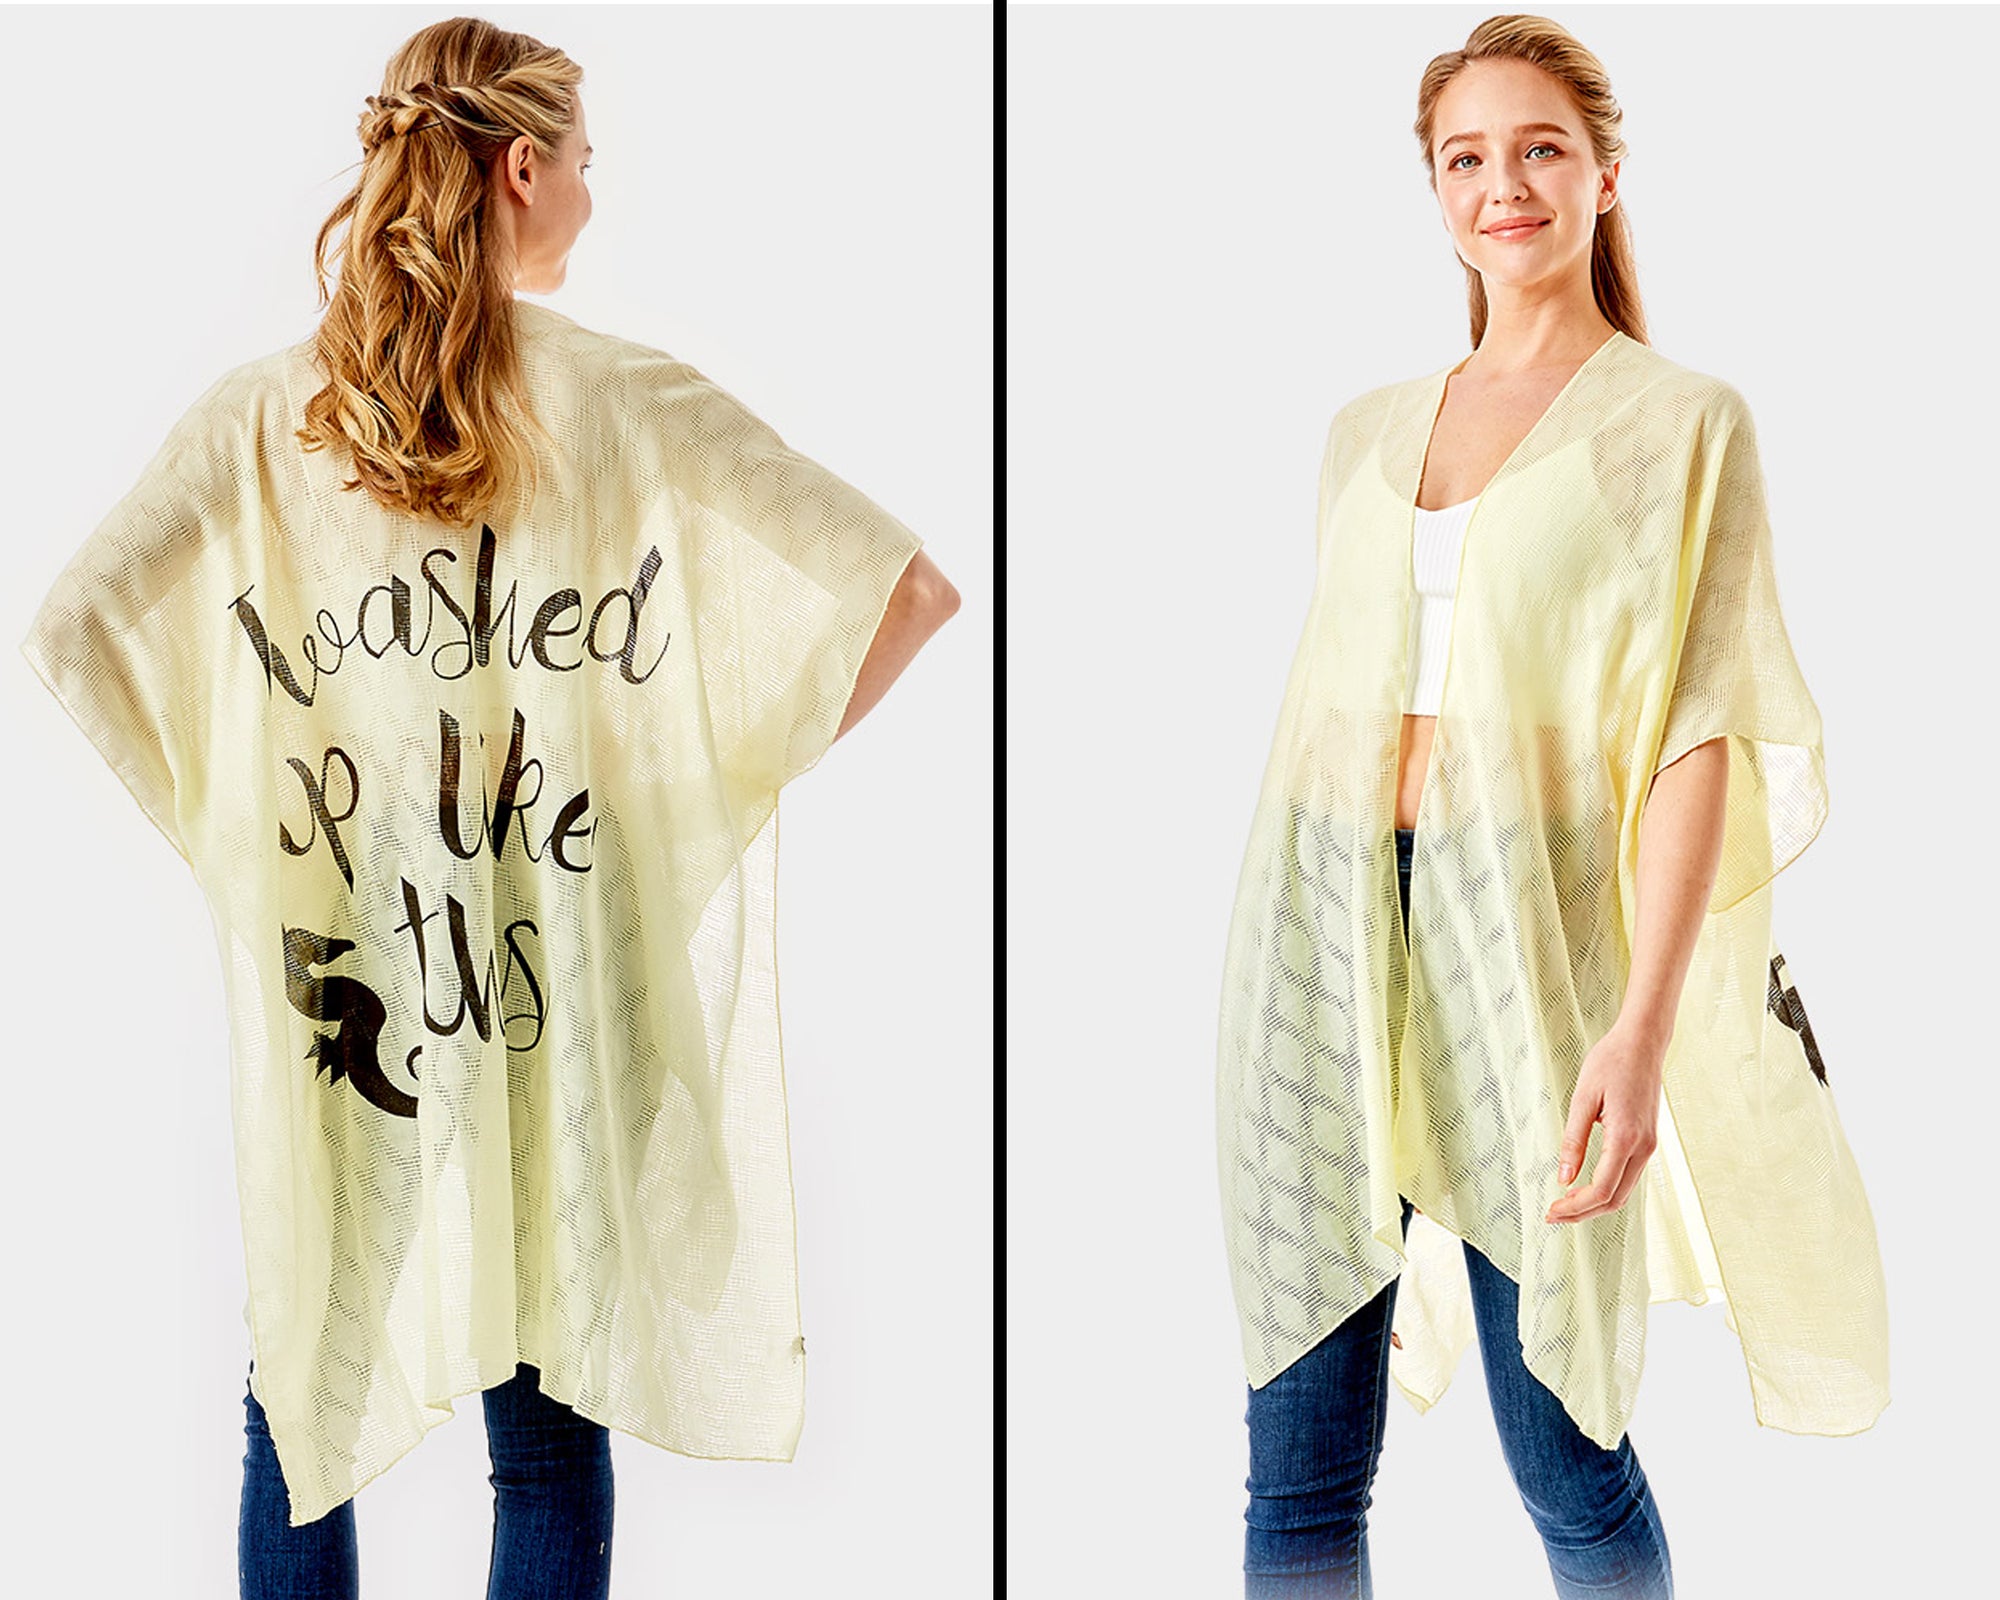 I Washed Up Like This Sea Horse Sheer Cover-Up Kimono Poncho | Easy On & Off Open Front | Perfect for the Beach, Covering Up Bathing Suit bathing suit, beach, bikini, coverup, kimono, pool, poolside, suntanning, tanning by Expression Tees